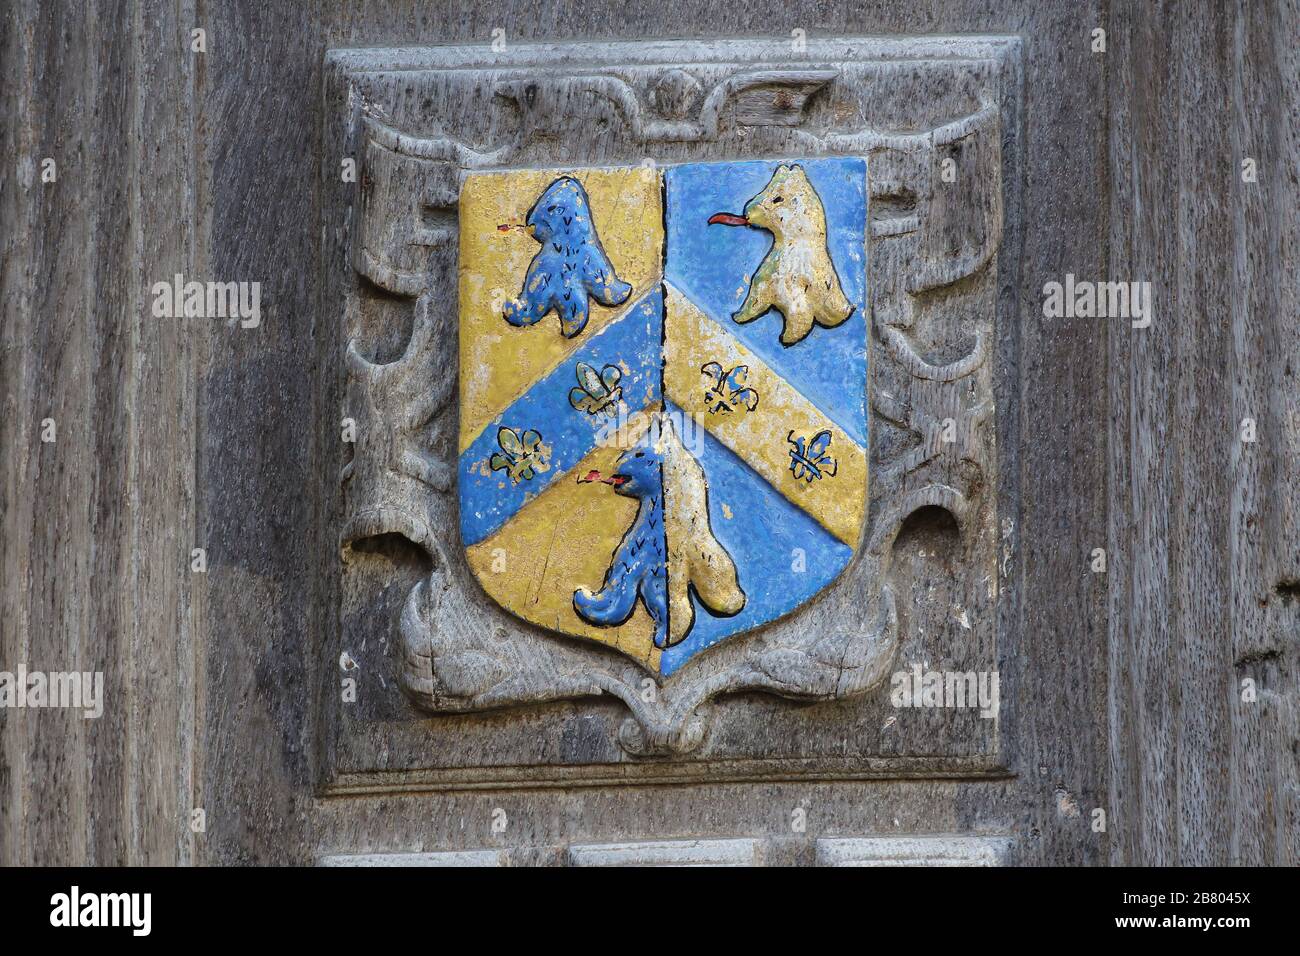 Coat of arms of Trinity College Oxford University the badge or crest is carved or embossed on the Great Gate to the Bodleian library in Catte Street Stock Photo